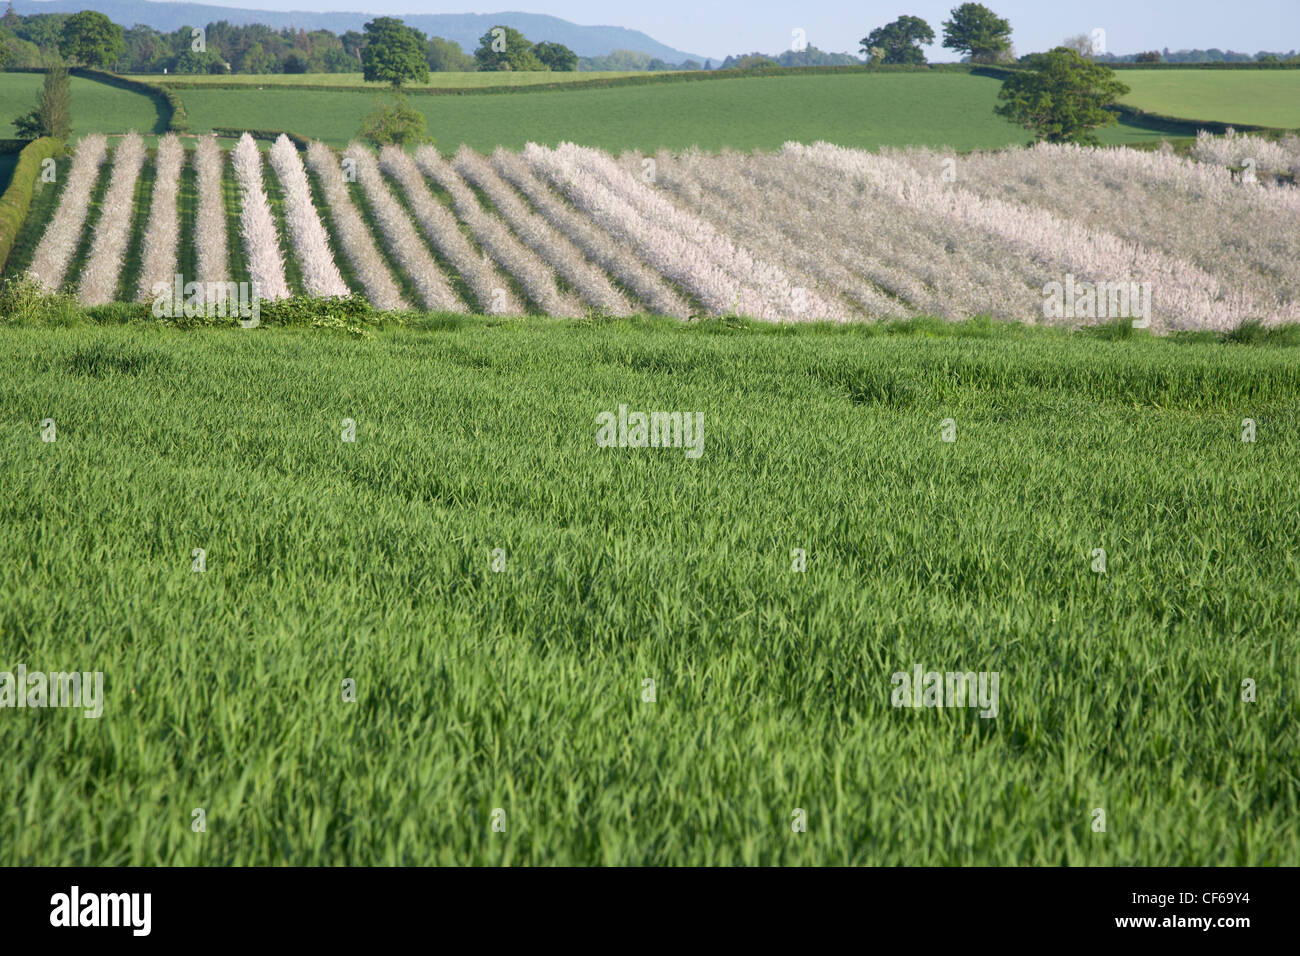 A view across fields and apple orchards in Herefordshire. Stock Photo